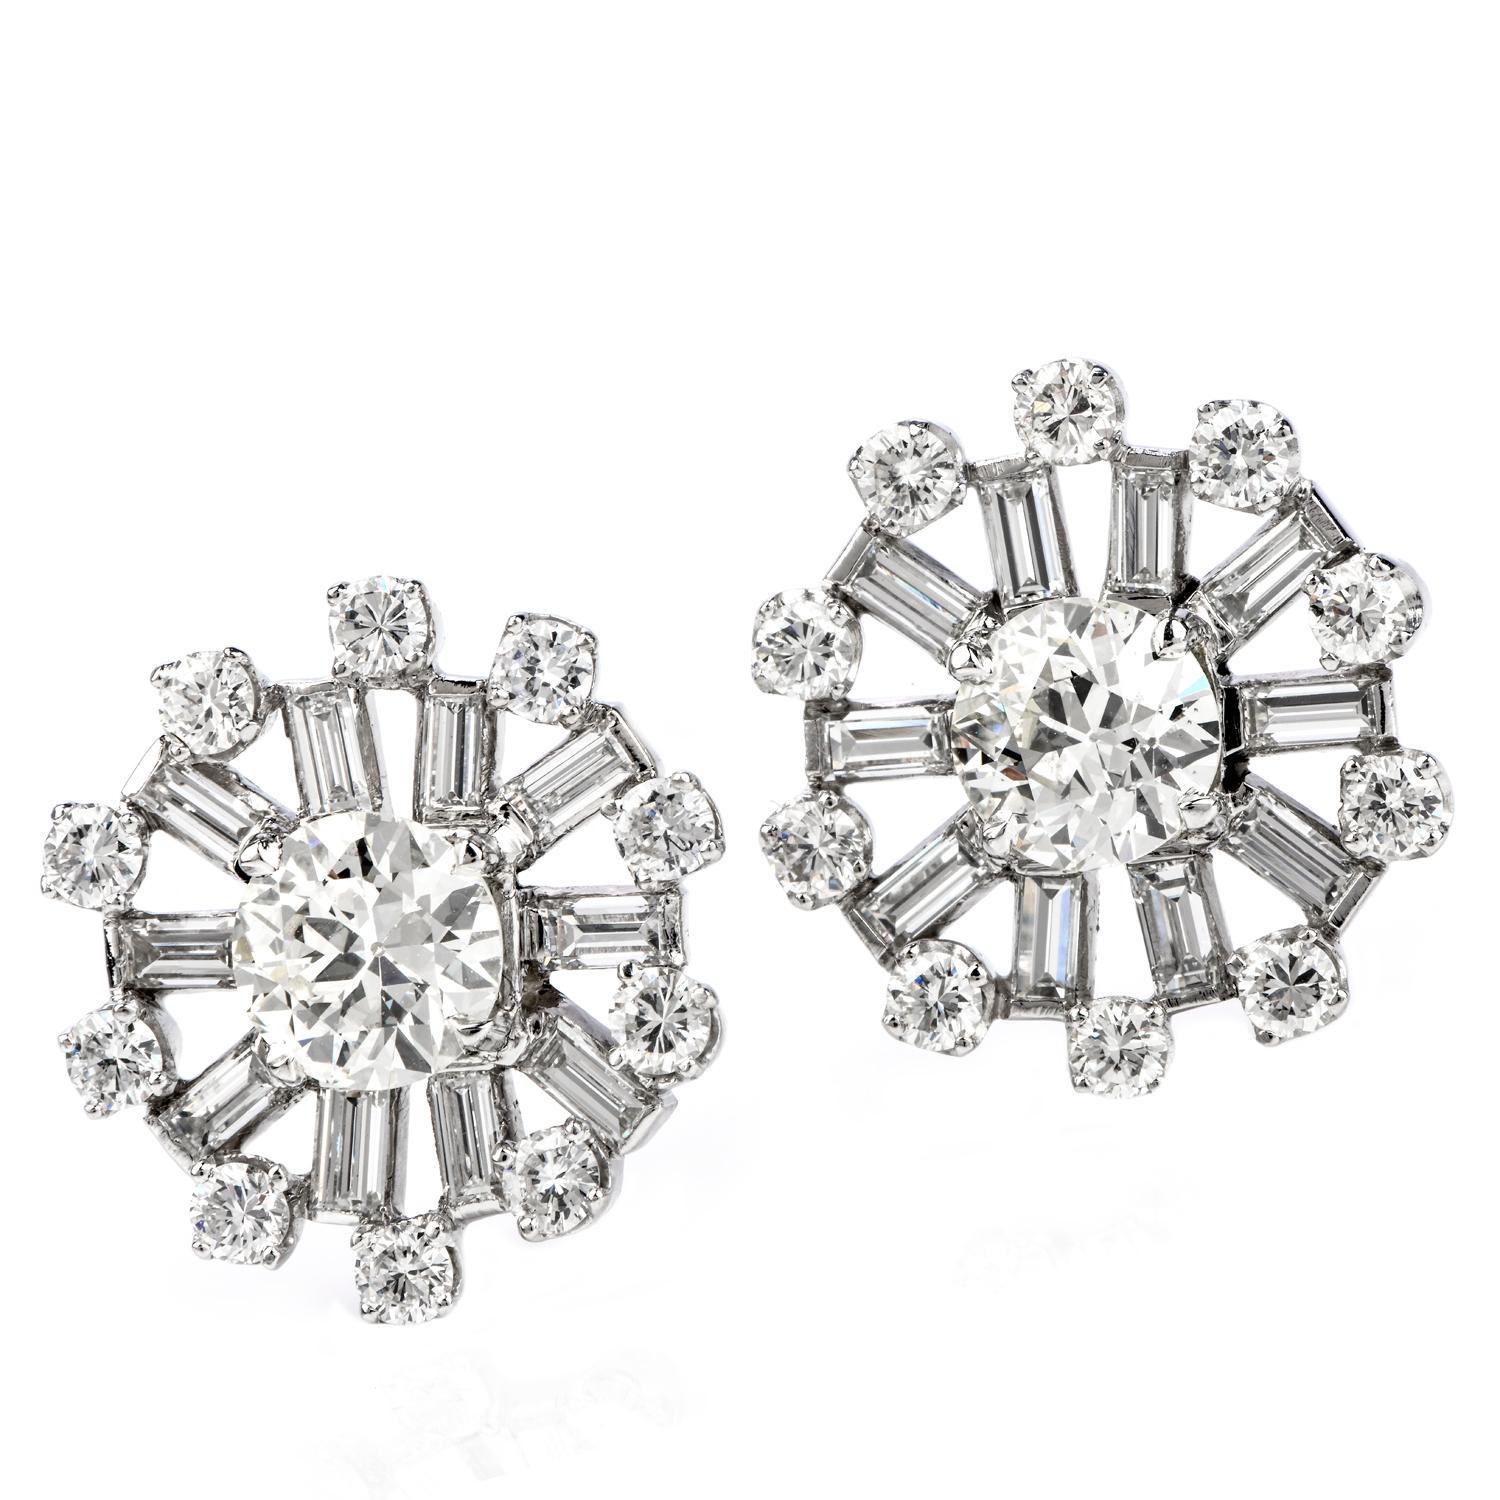 What a Joyfull moment On a Ferris wheel Ride!

 With a Ferris Wheel inspired design these Vintage earrings were carefully crafted in Platinum including their Screw Backs for pierced ears. 

Their two Center European Cut 3.15 carat in total , I